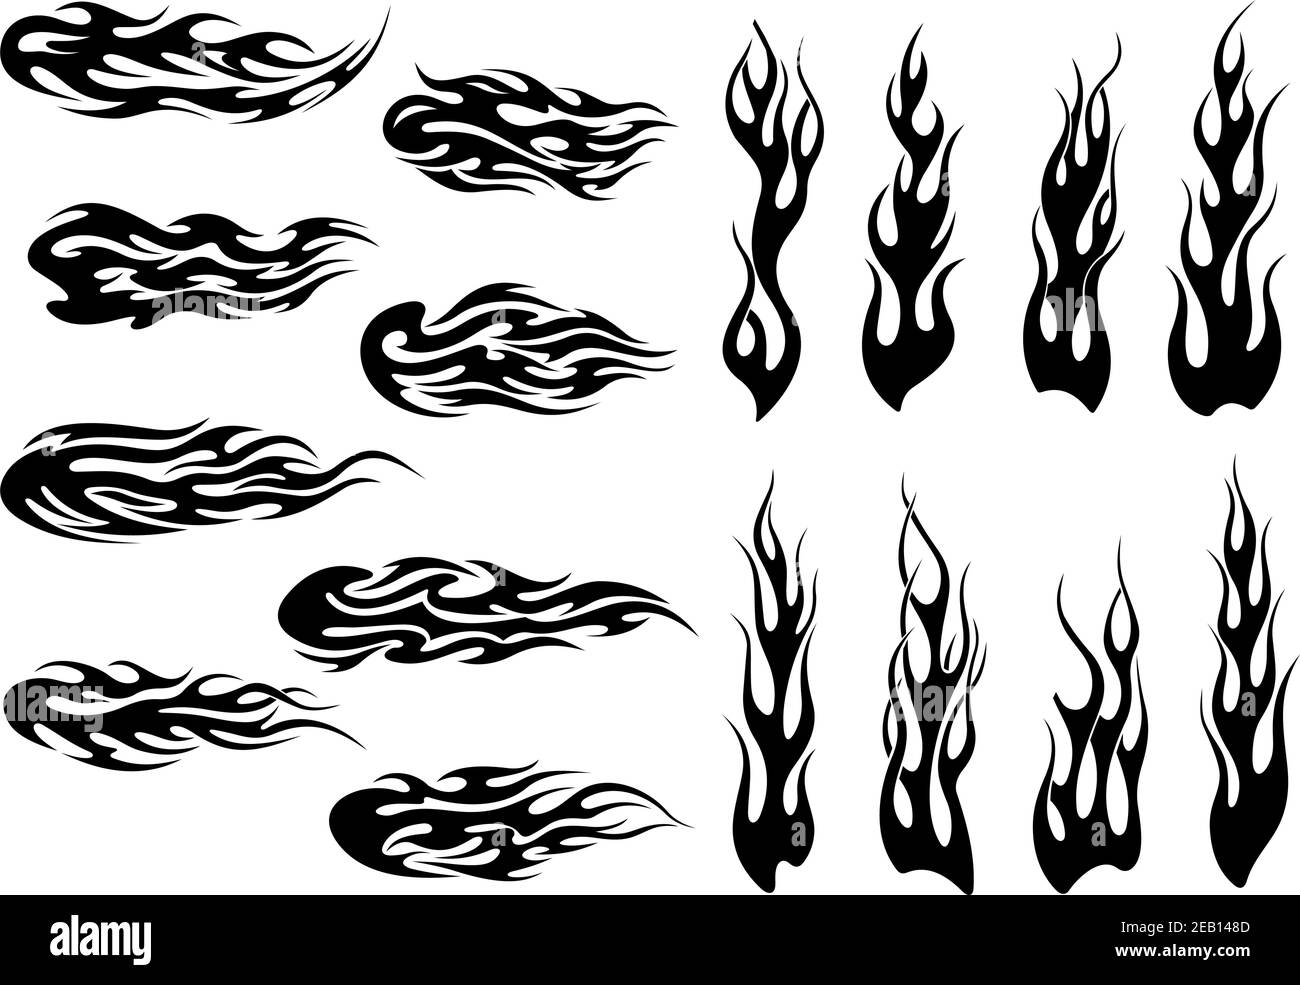 https://c8.alamy.com/comp/2EB148D/black-fire-flames-in-tribal-style-with-long-swirls-for-tattoo-and-vehicle-decoration-design-2EB148D.jpg